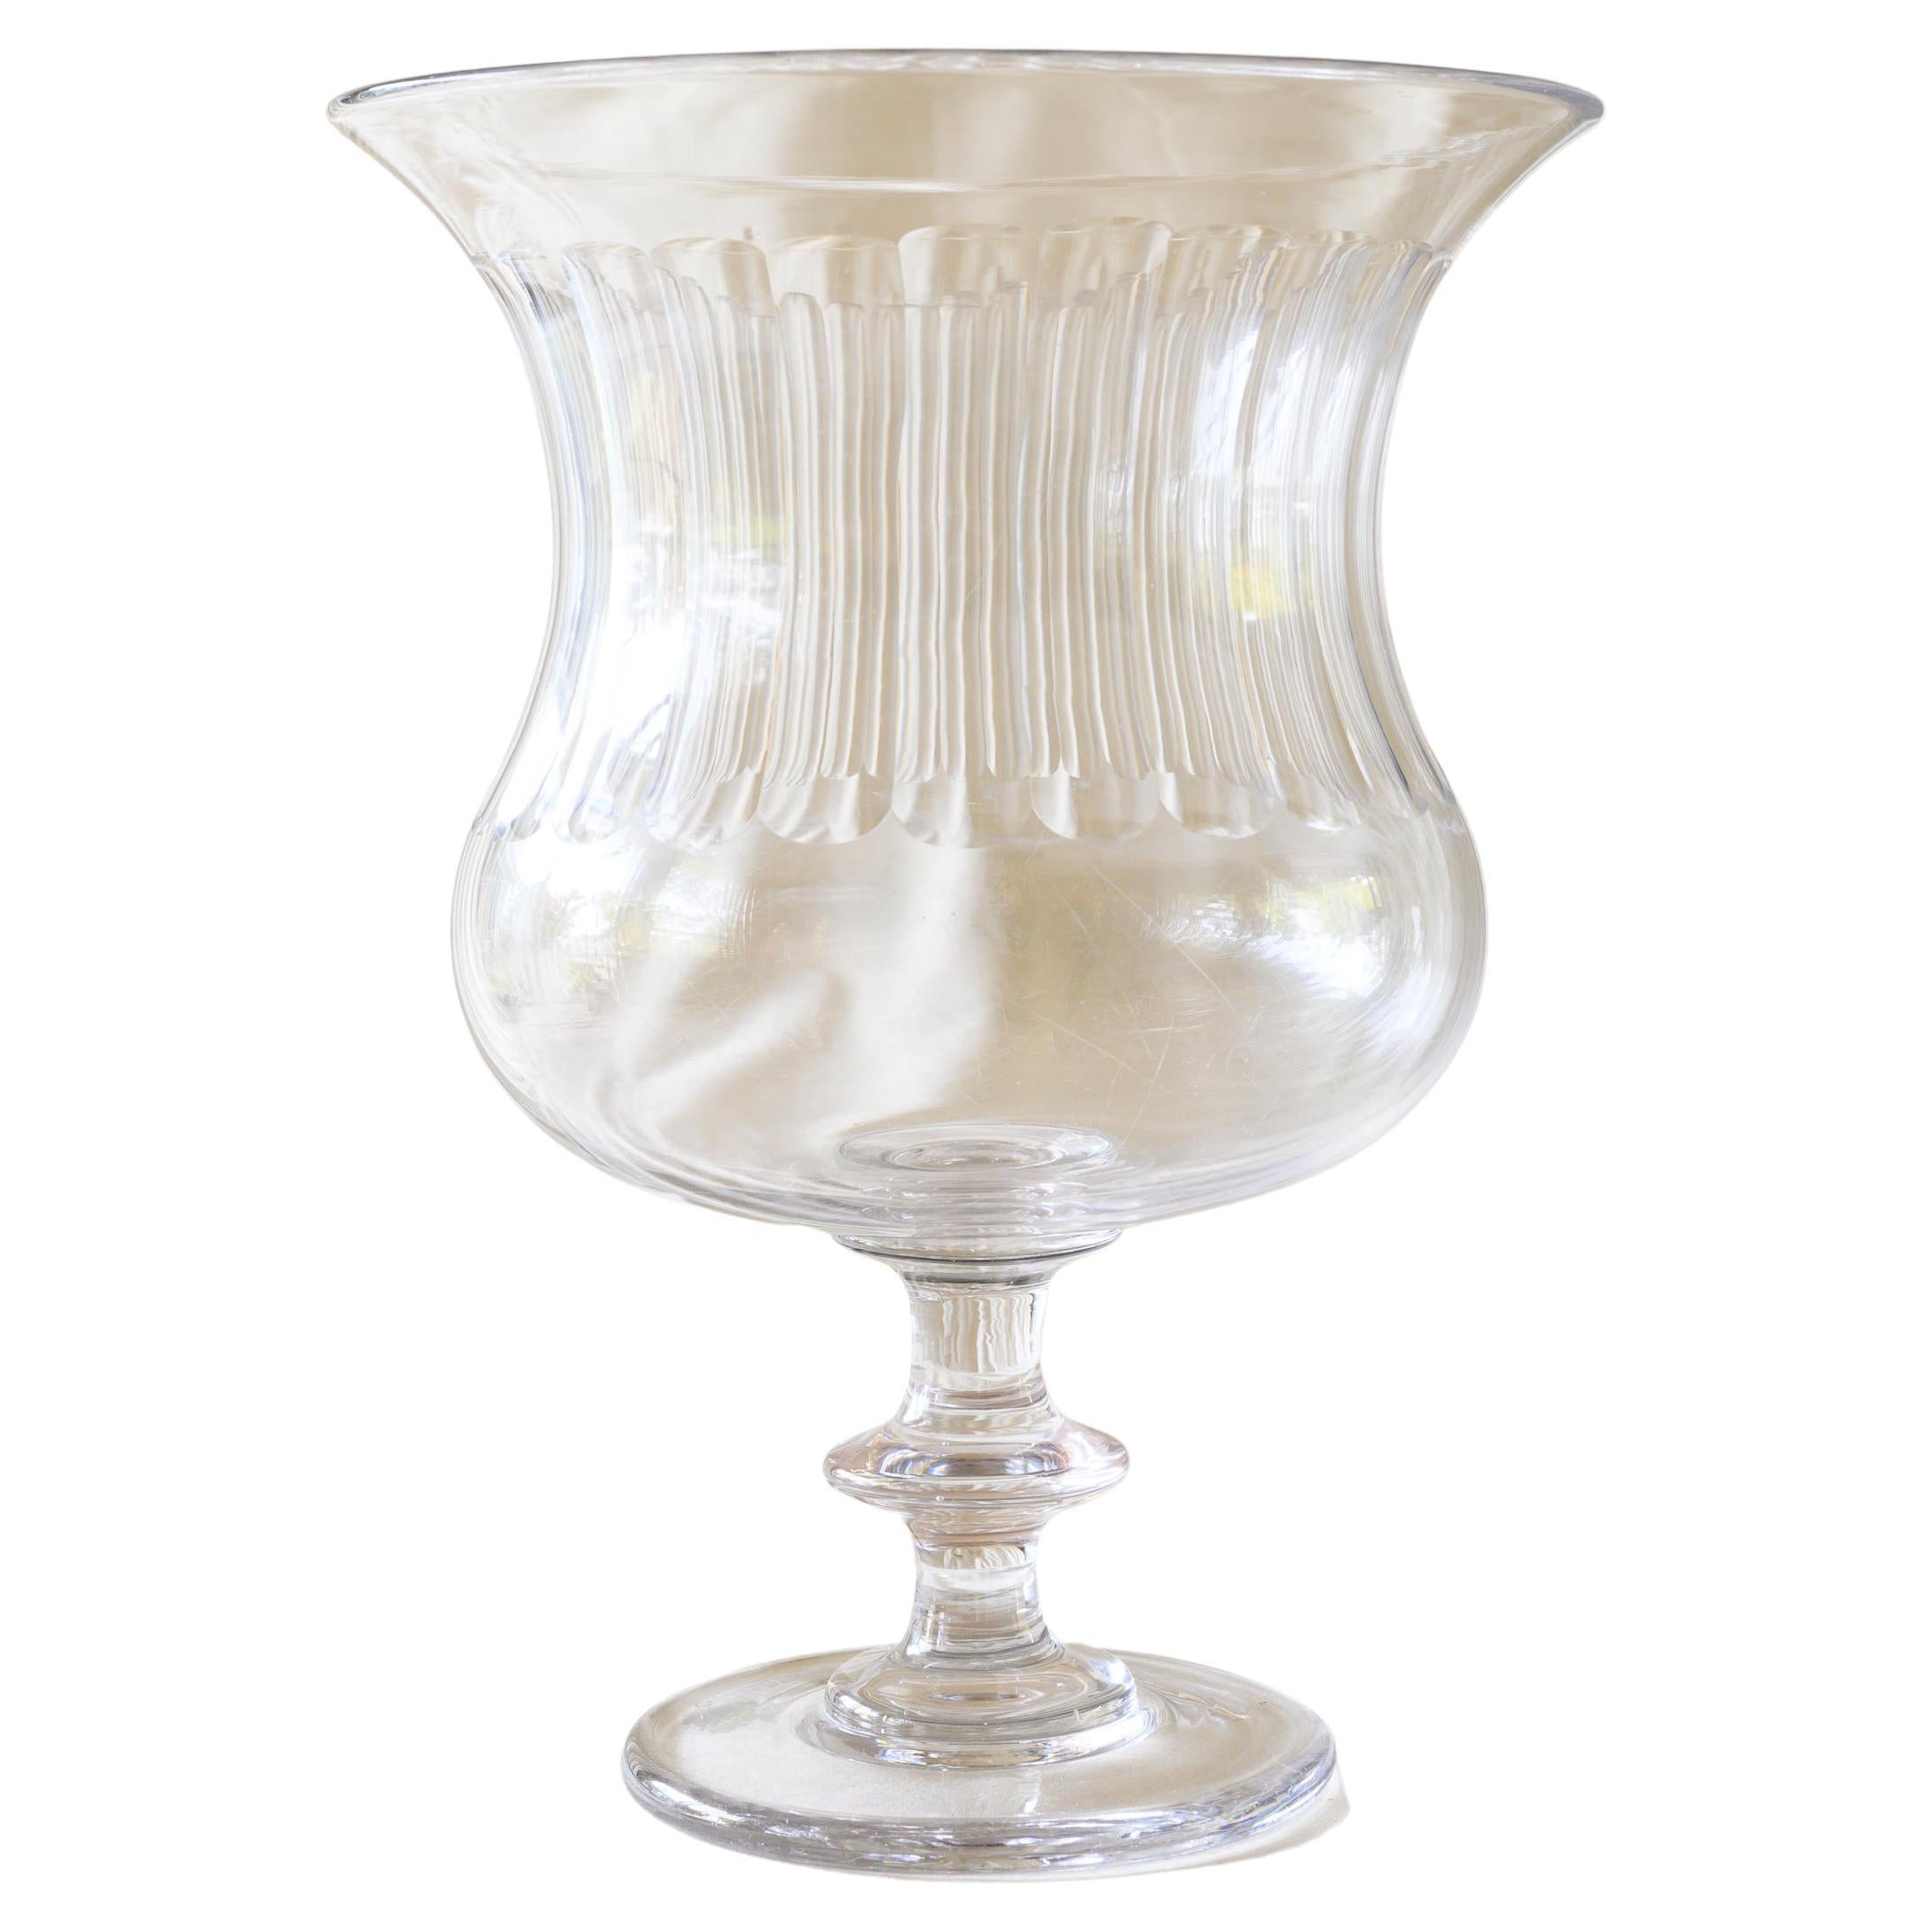 19th Century Neoclassical Crystal Baluster Urn